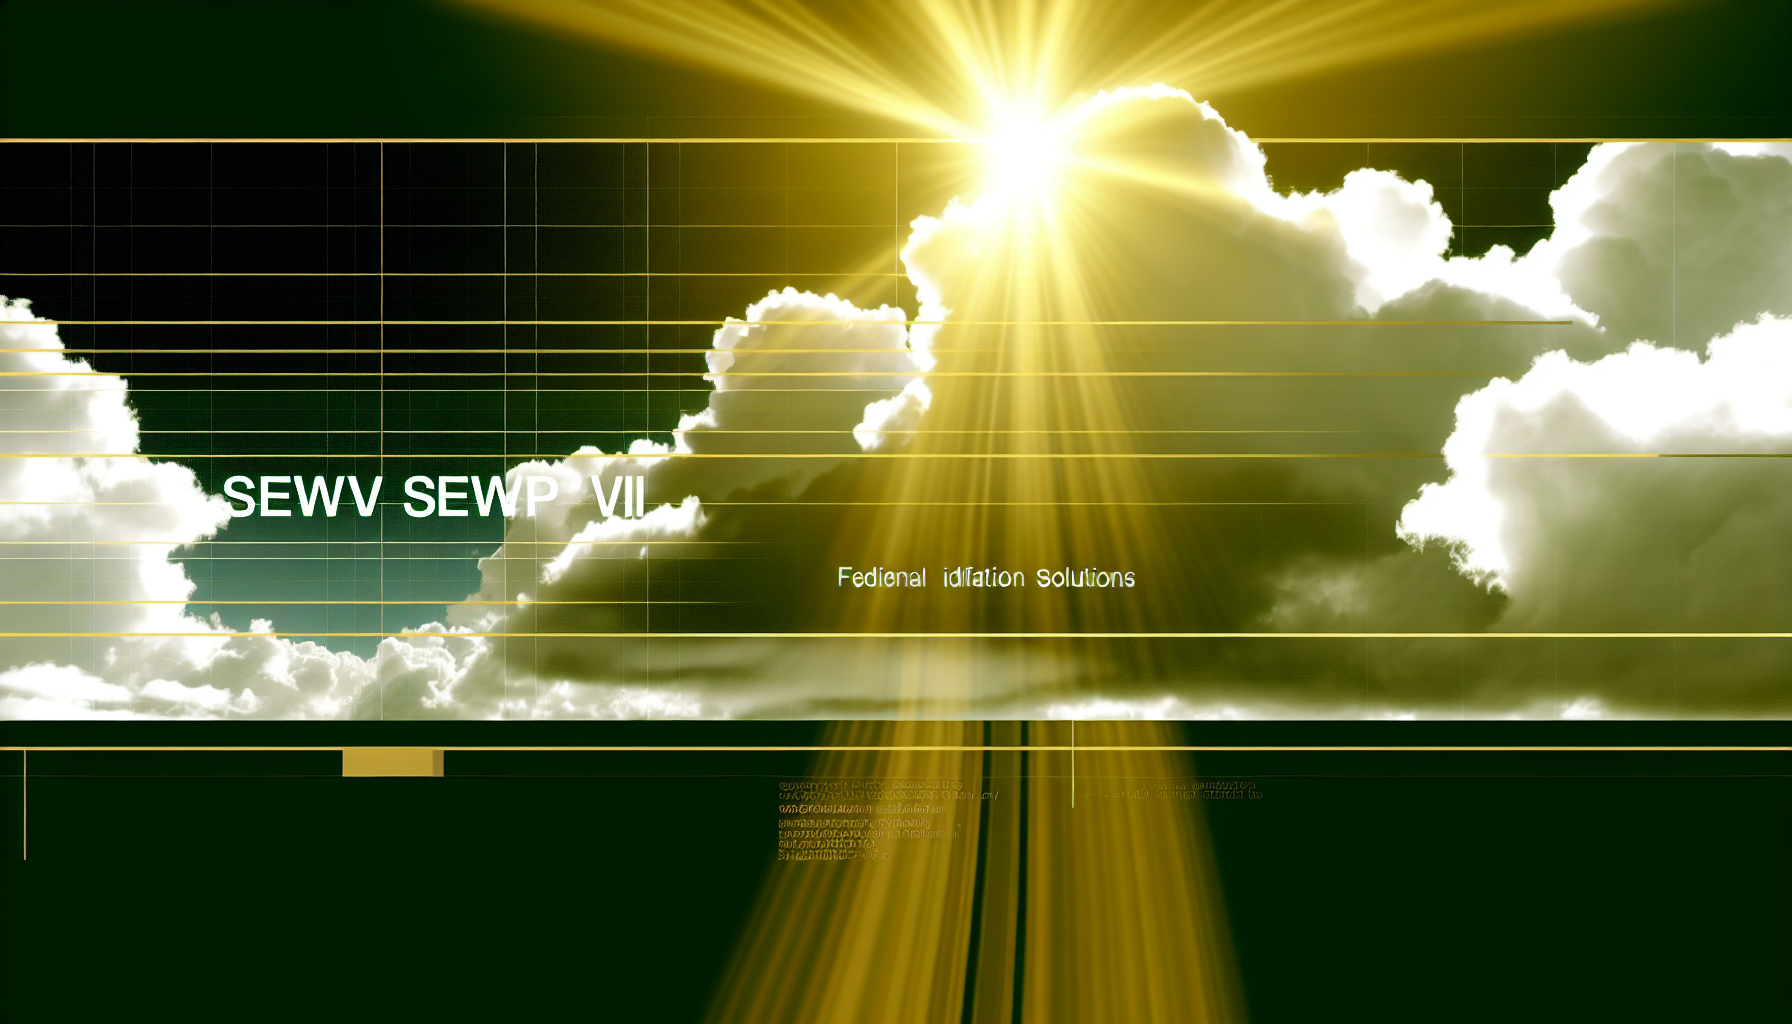 Photo of a cloud-filled sky with sunlight breaking through, representing the significance of cloud solutions in SEWP VI